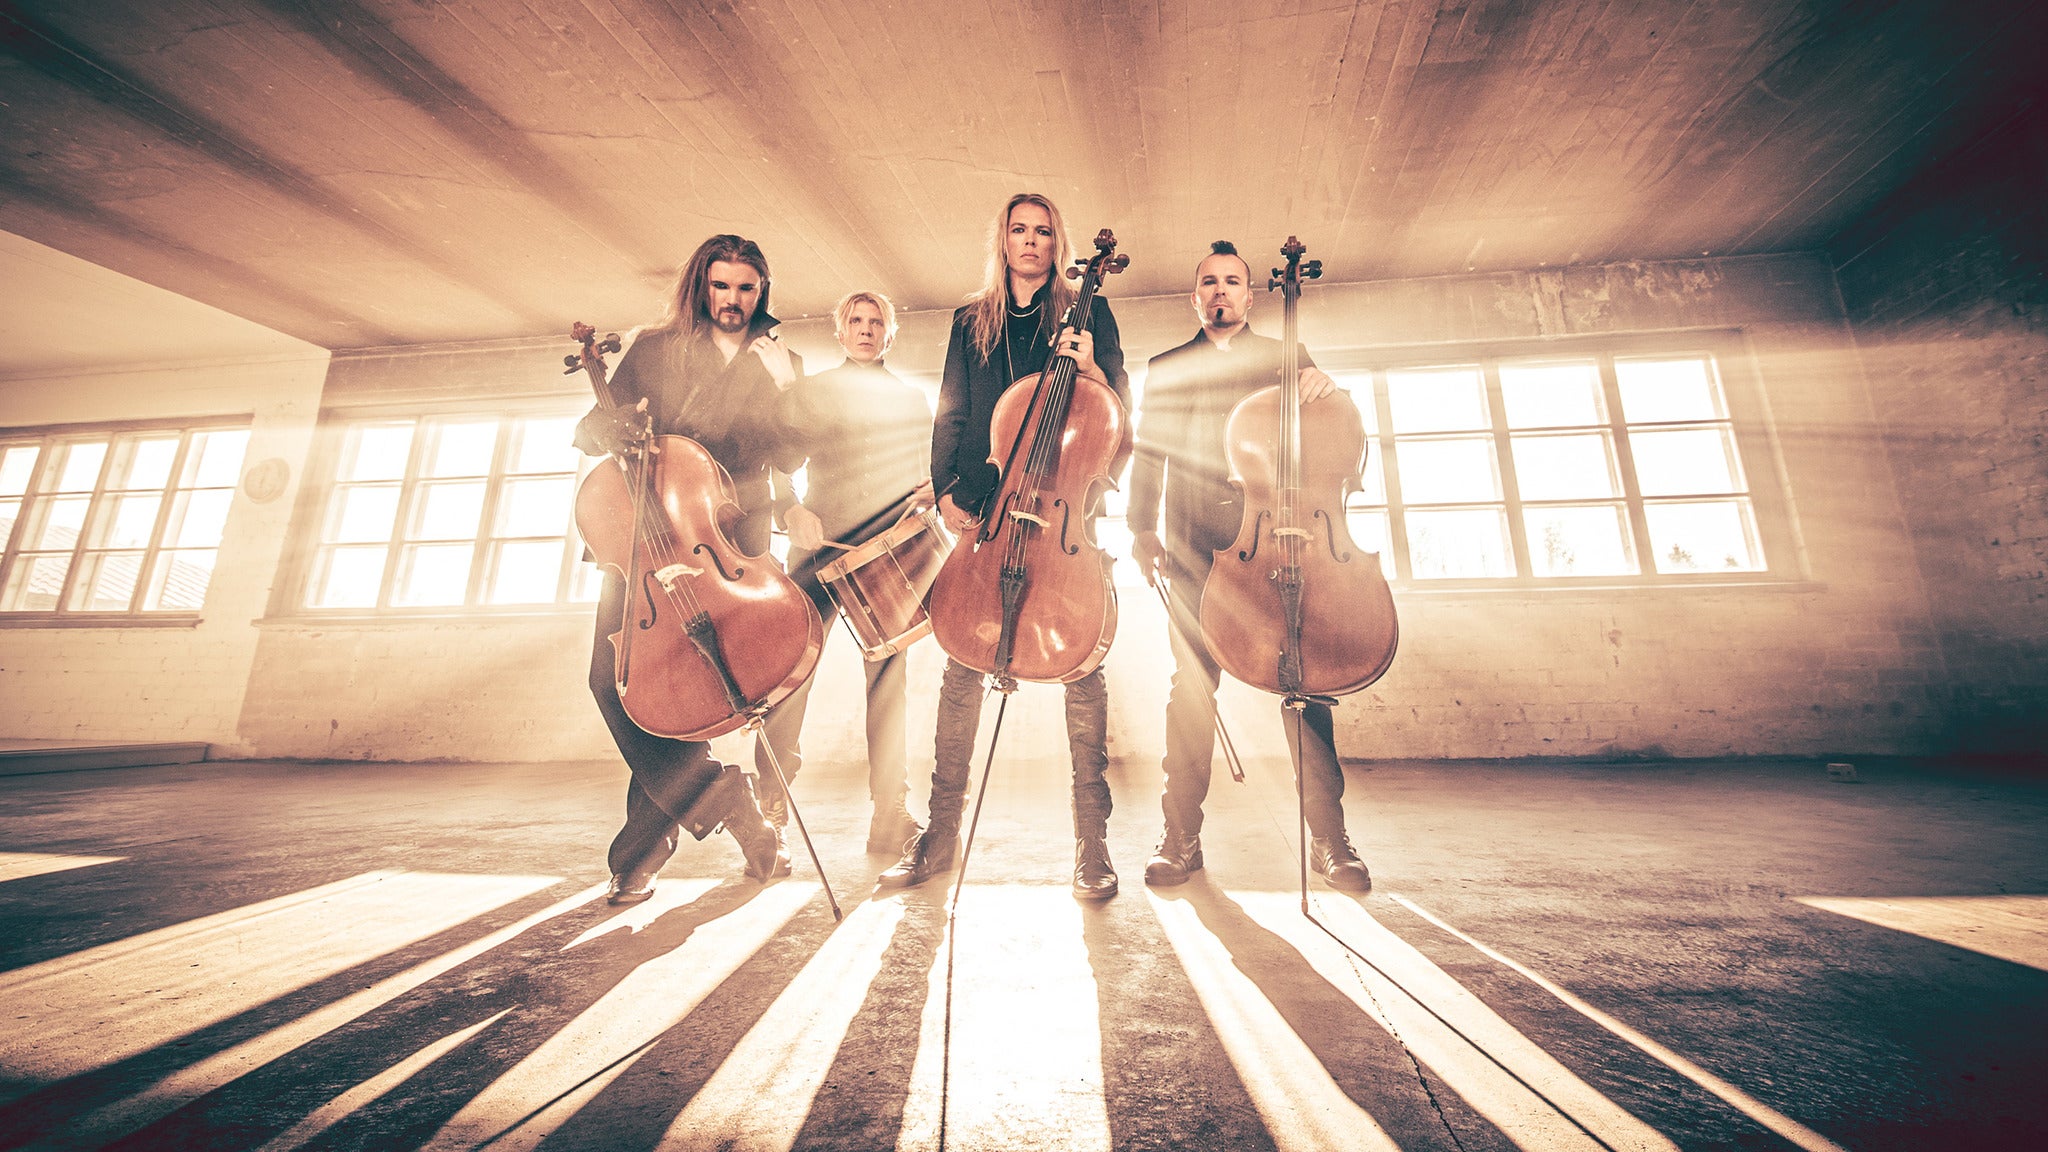 Apocalyptica - Cell-0 Tour presale password for early tickets in Baltimore